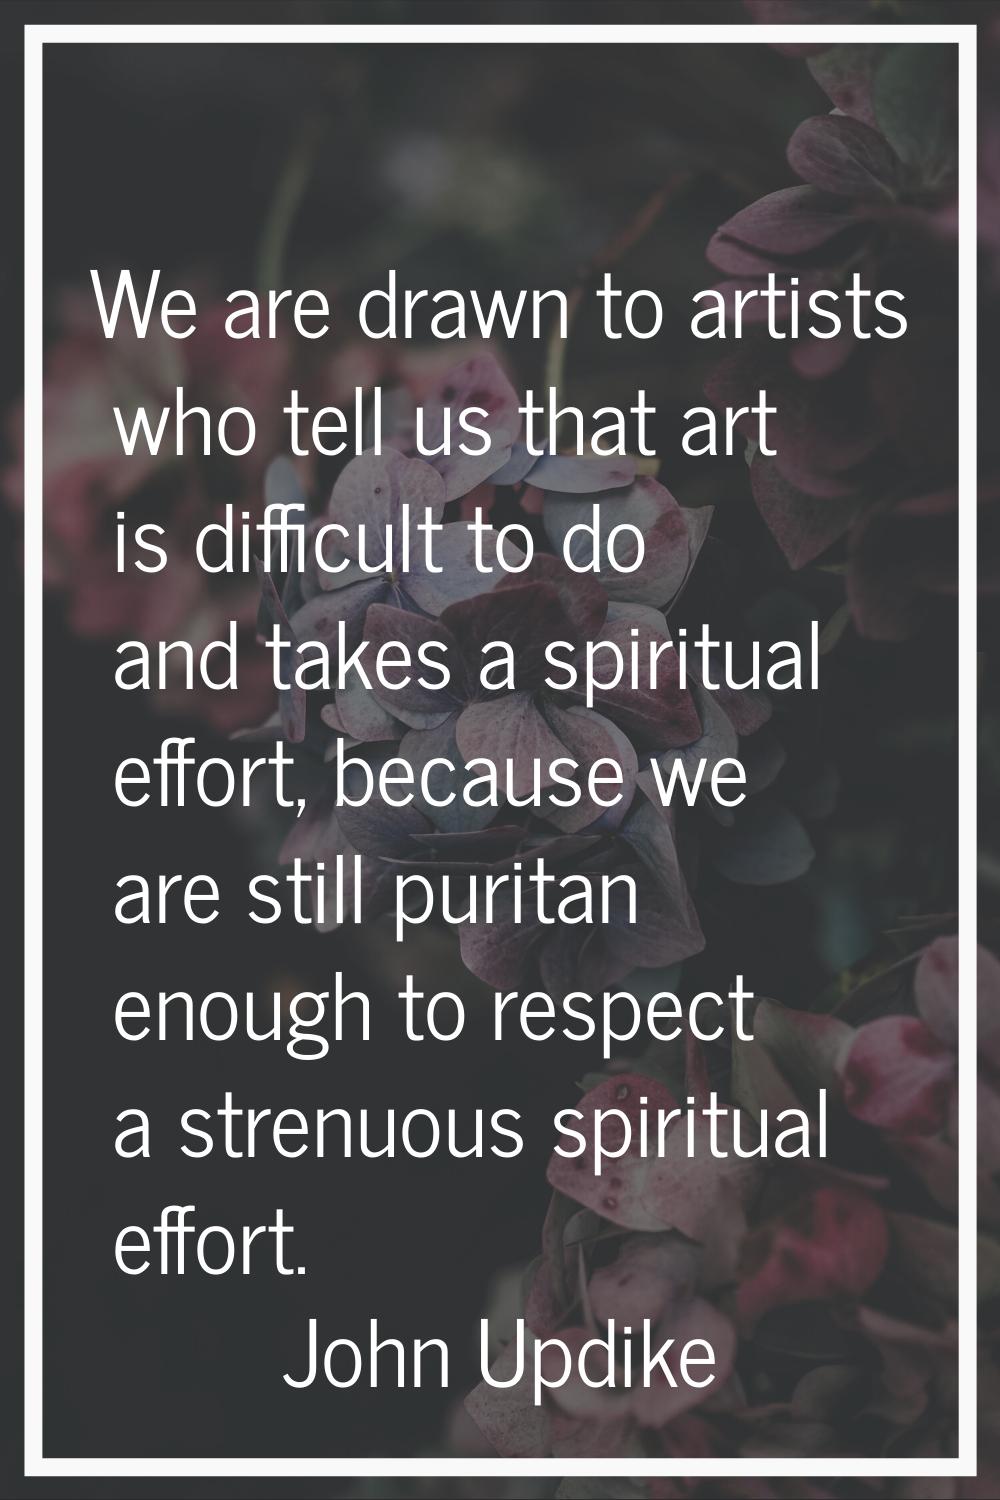 We are drawn to artists who tell us that art is difficult to do and takes a spiritual effort, becau